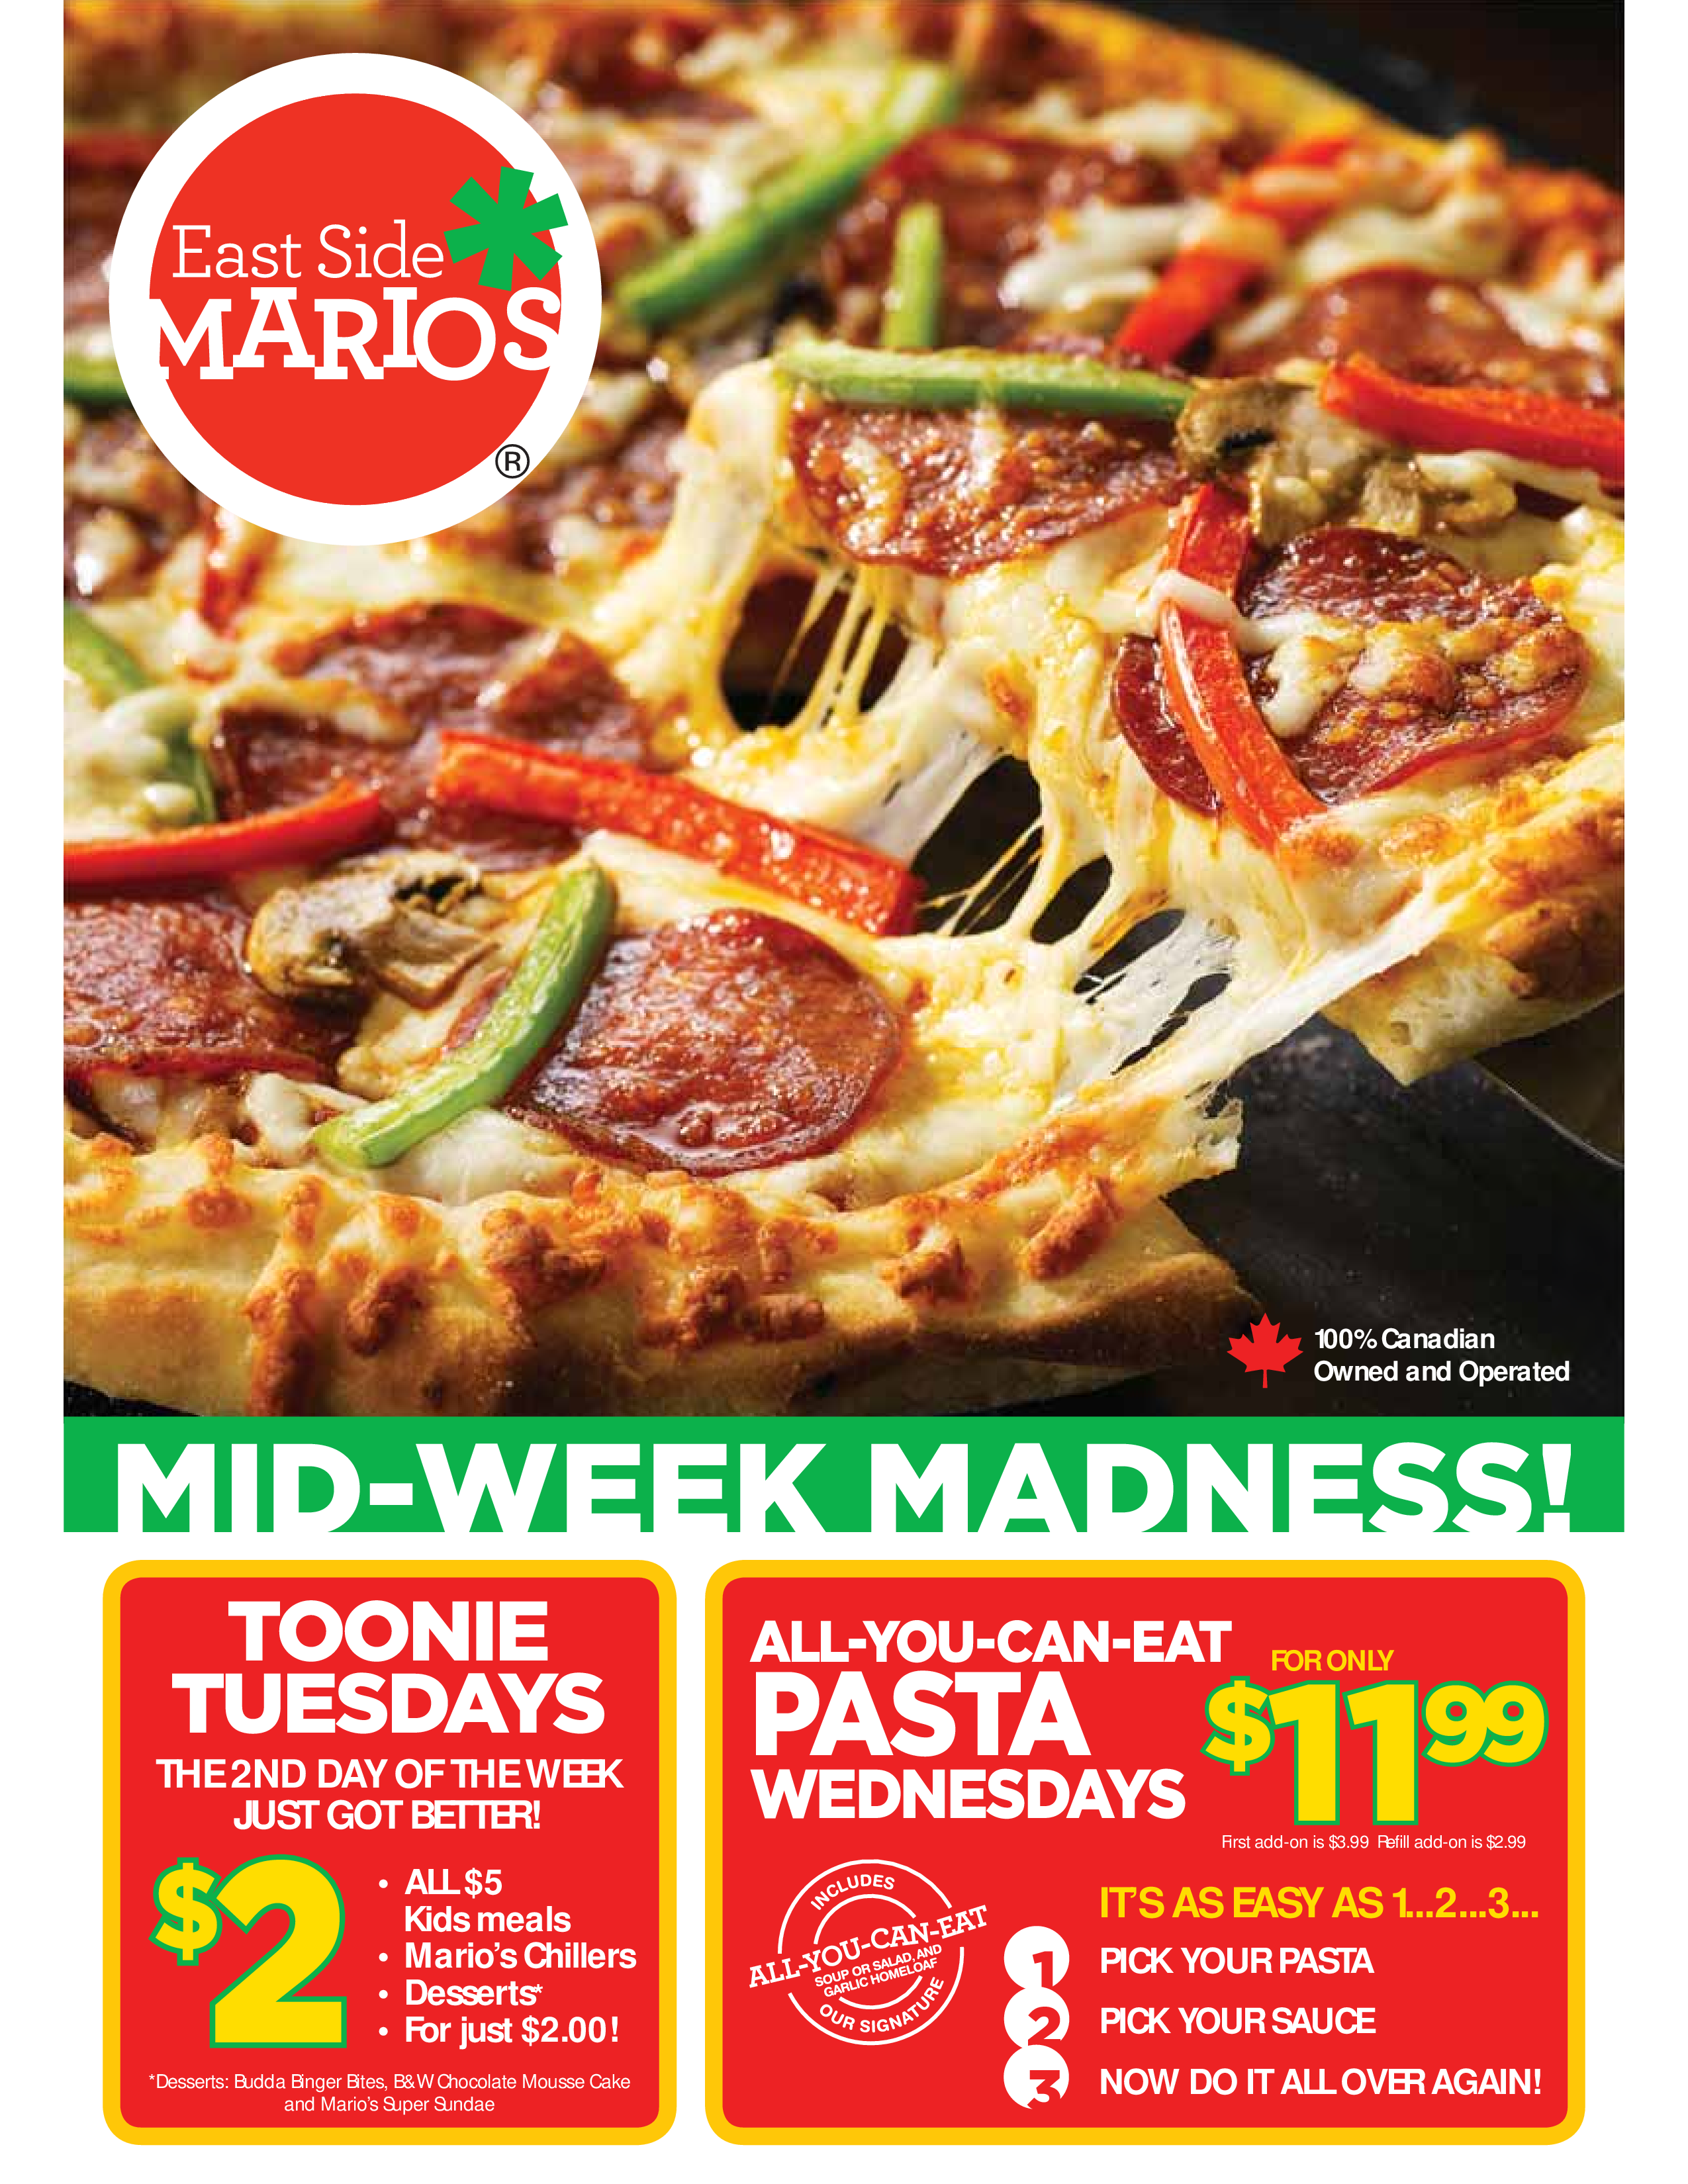 What are some good recipes from East Side Mario's?